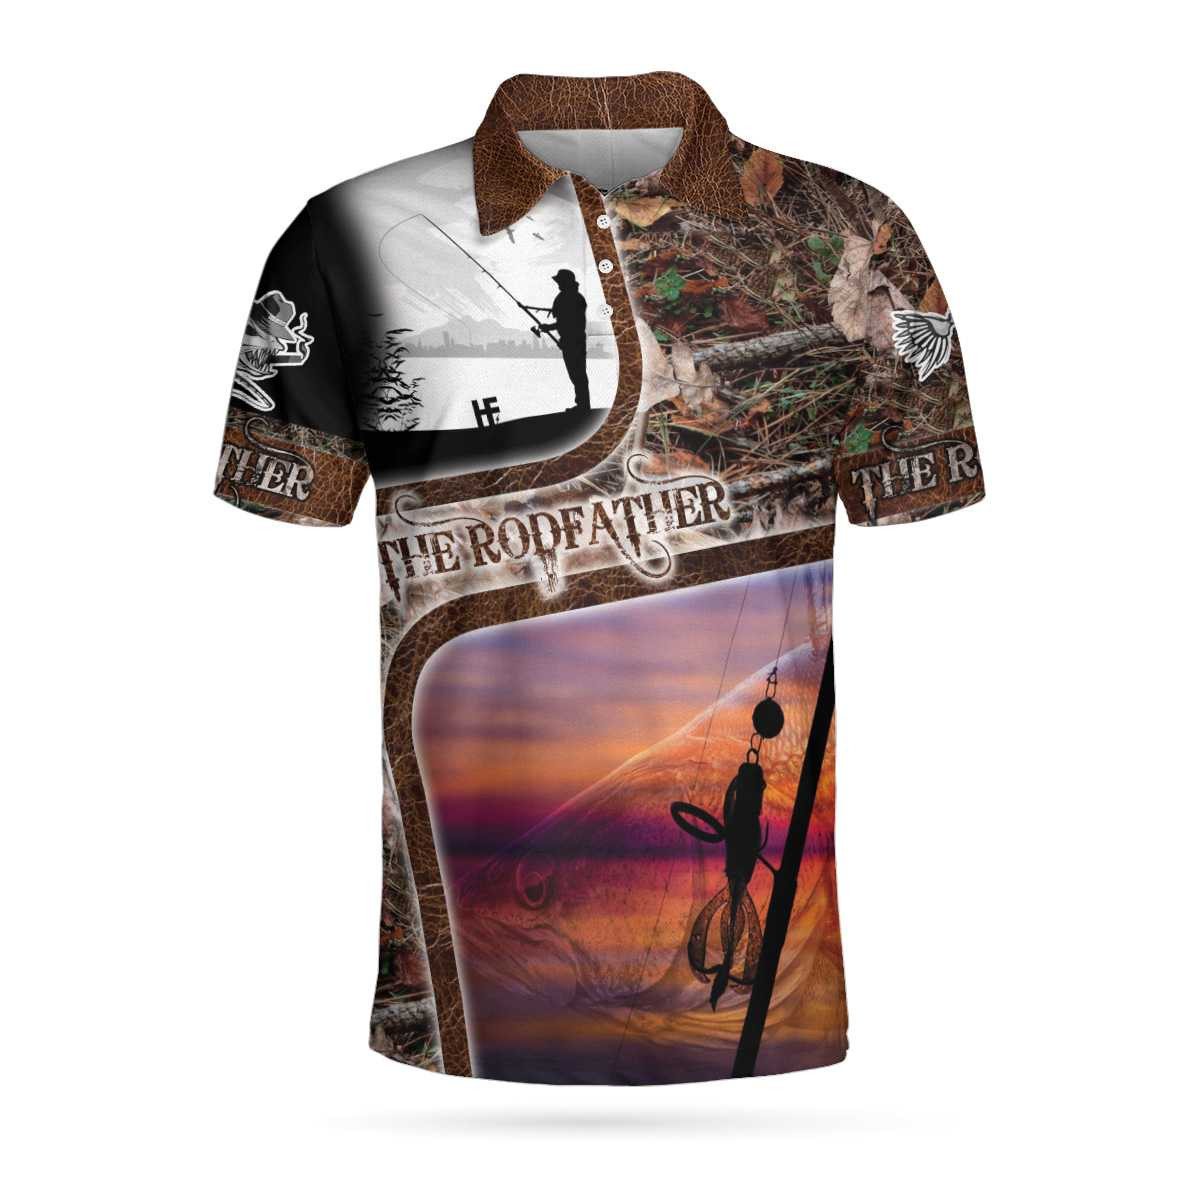 A Great Fisherman Isnt Born Great Print Polo Shirt The Rodfather Polo Shirt Best Fishing Shirt For Men